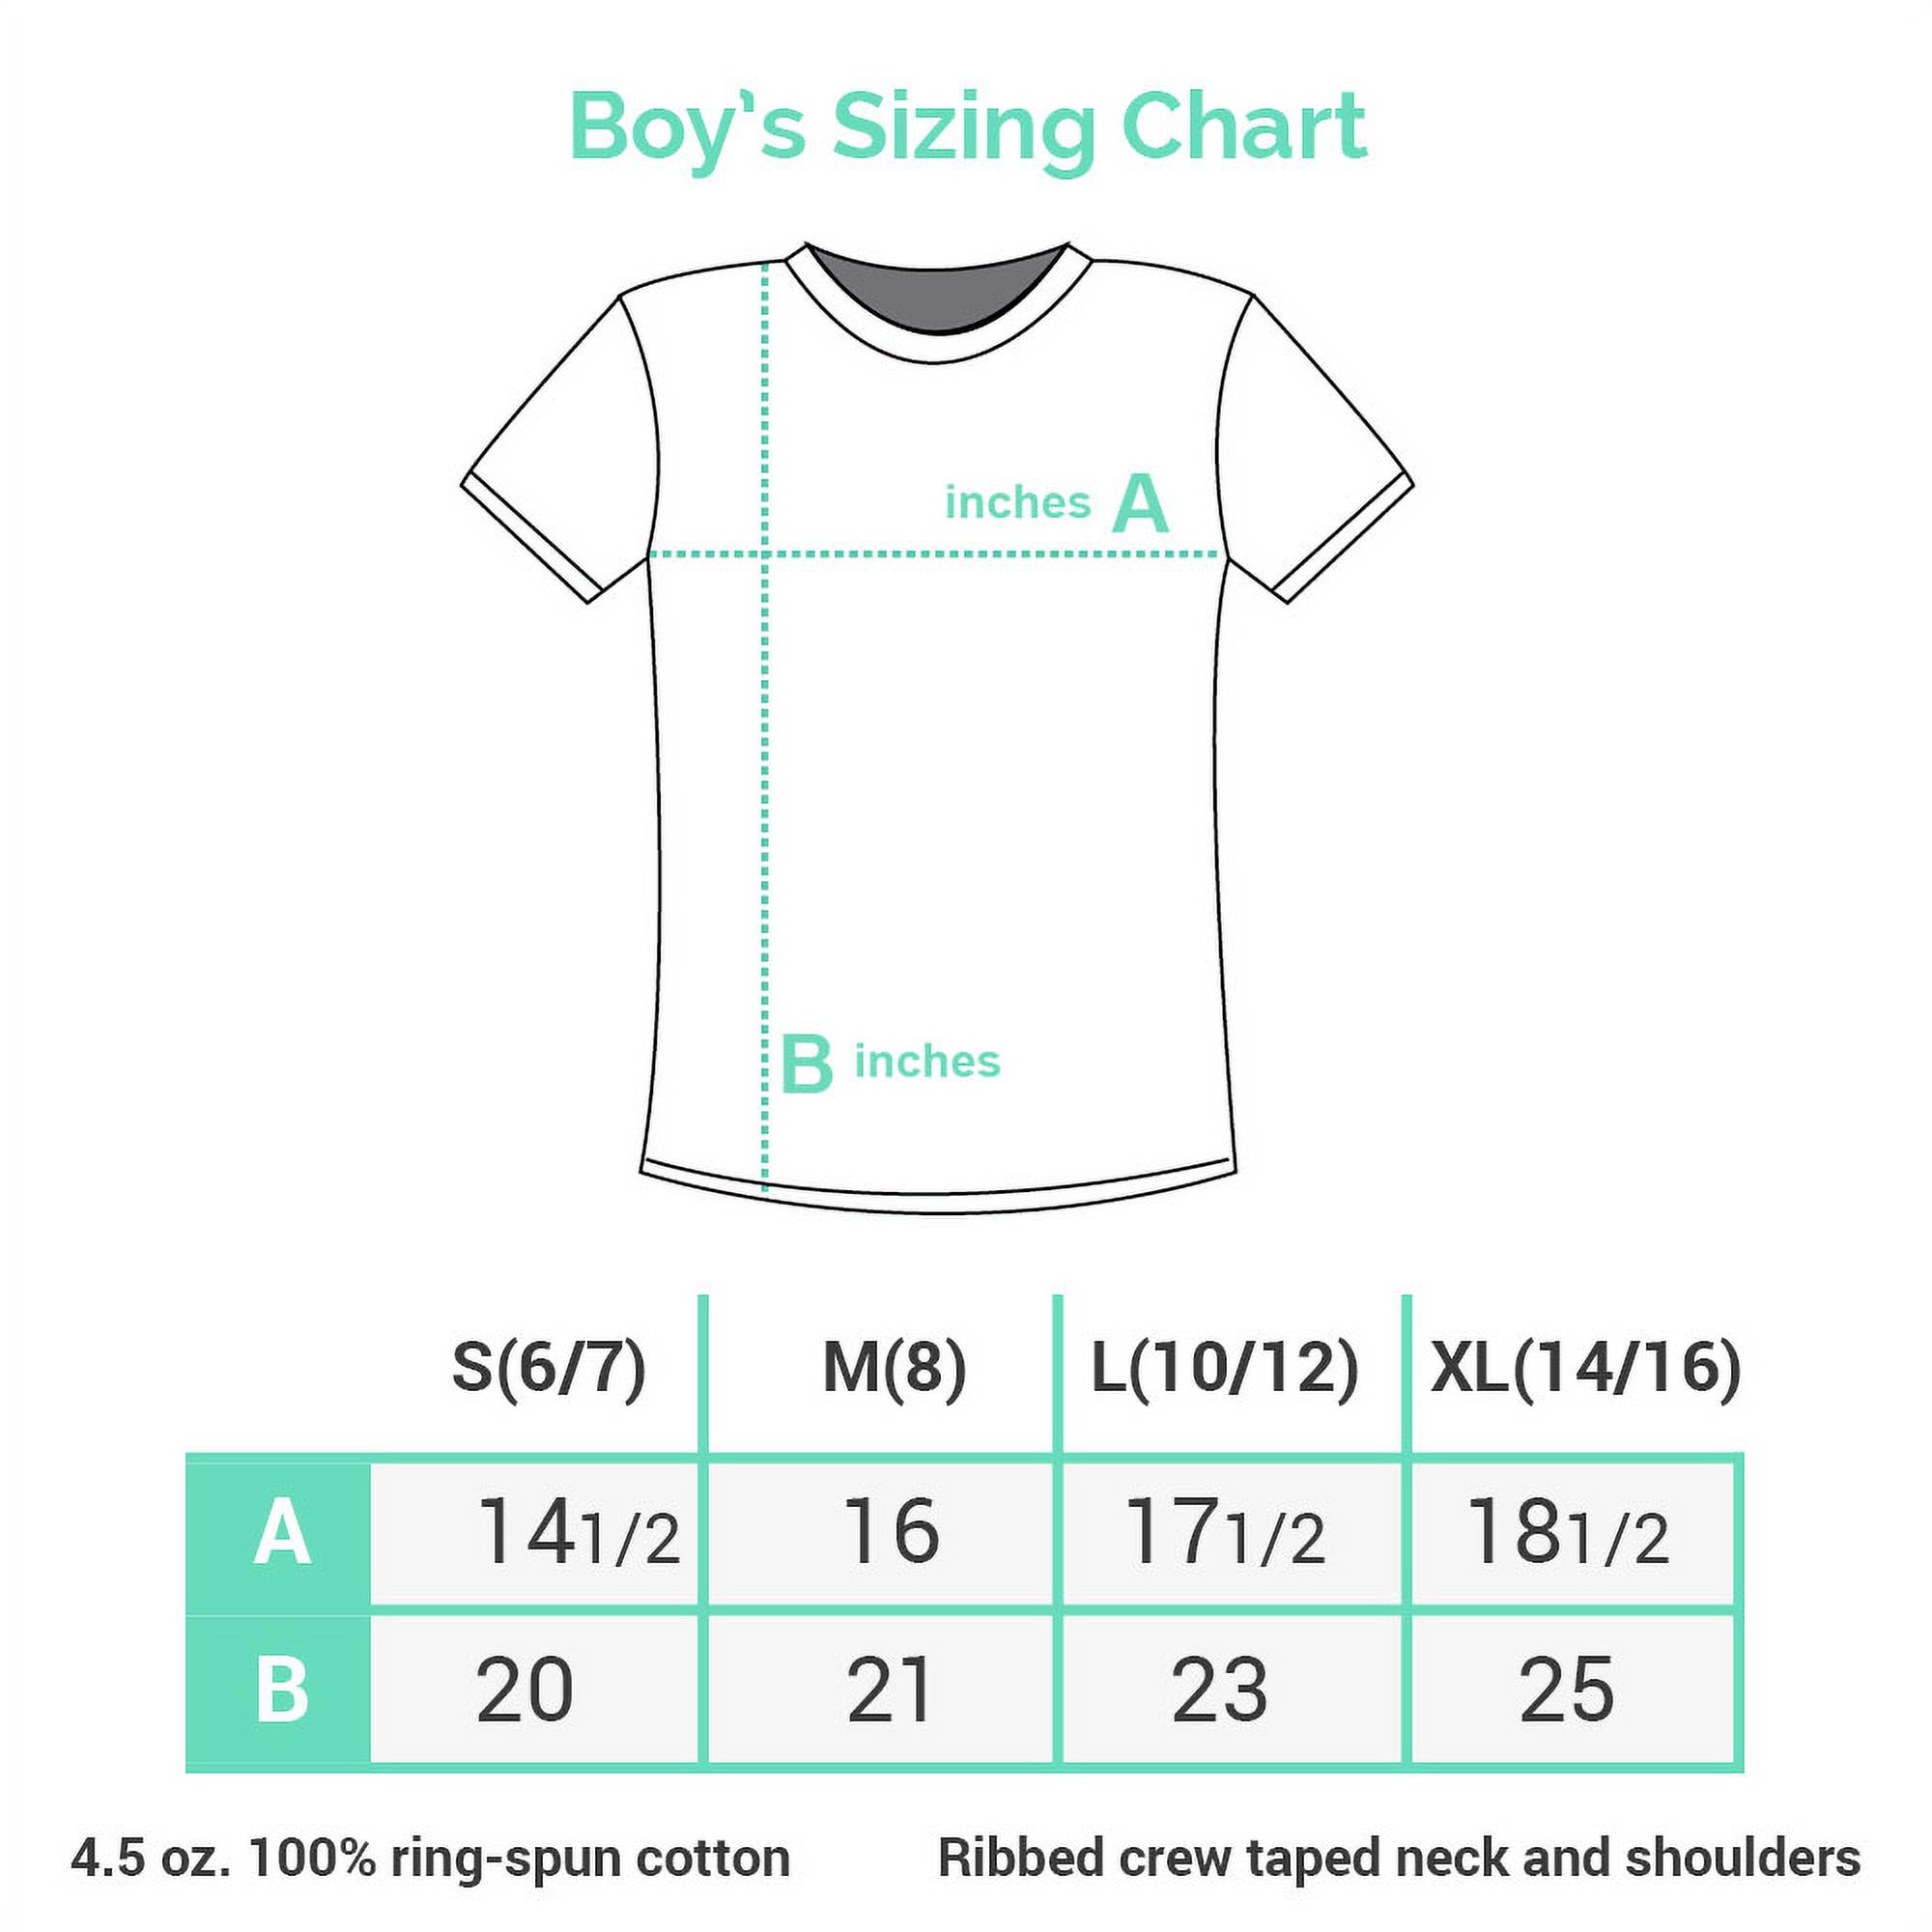 Trendy Dallas, Texas with Stars Boy's Cotton Youth Grey T-Shirt - image 2 of 2